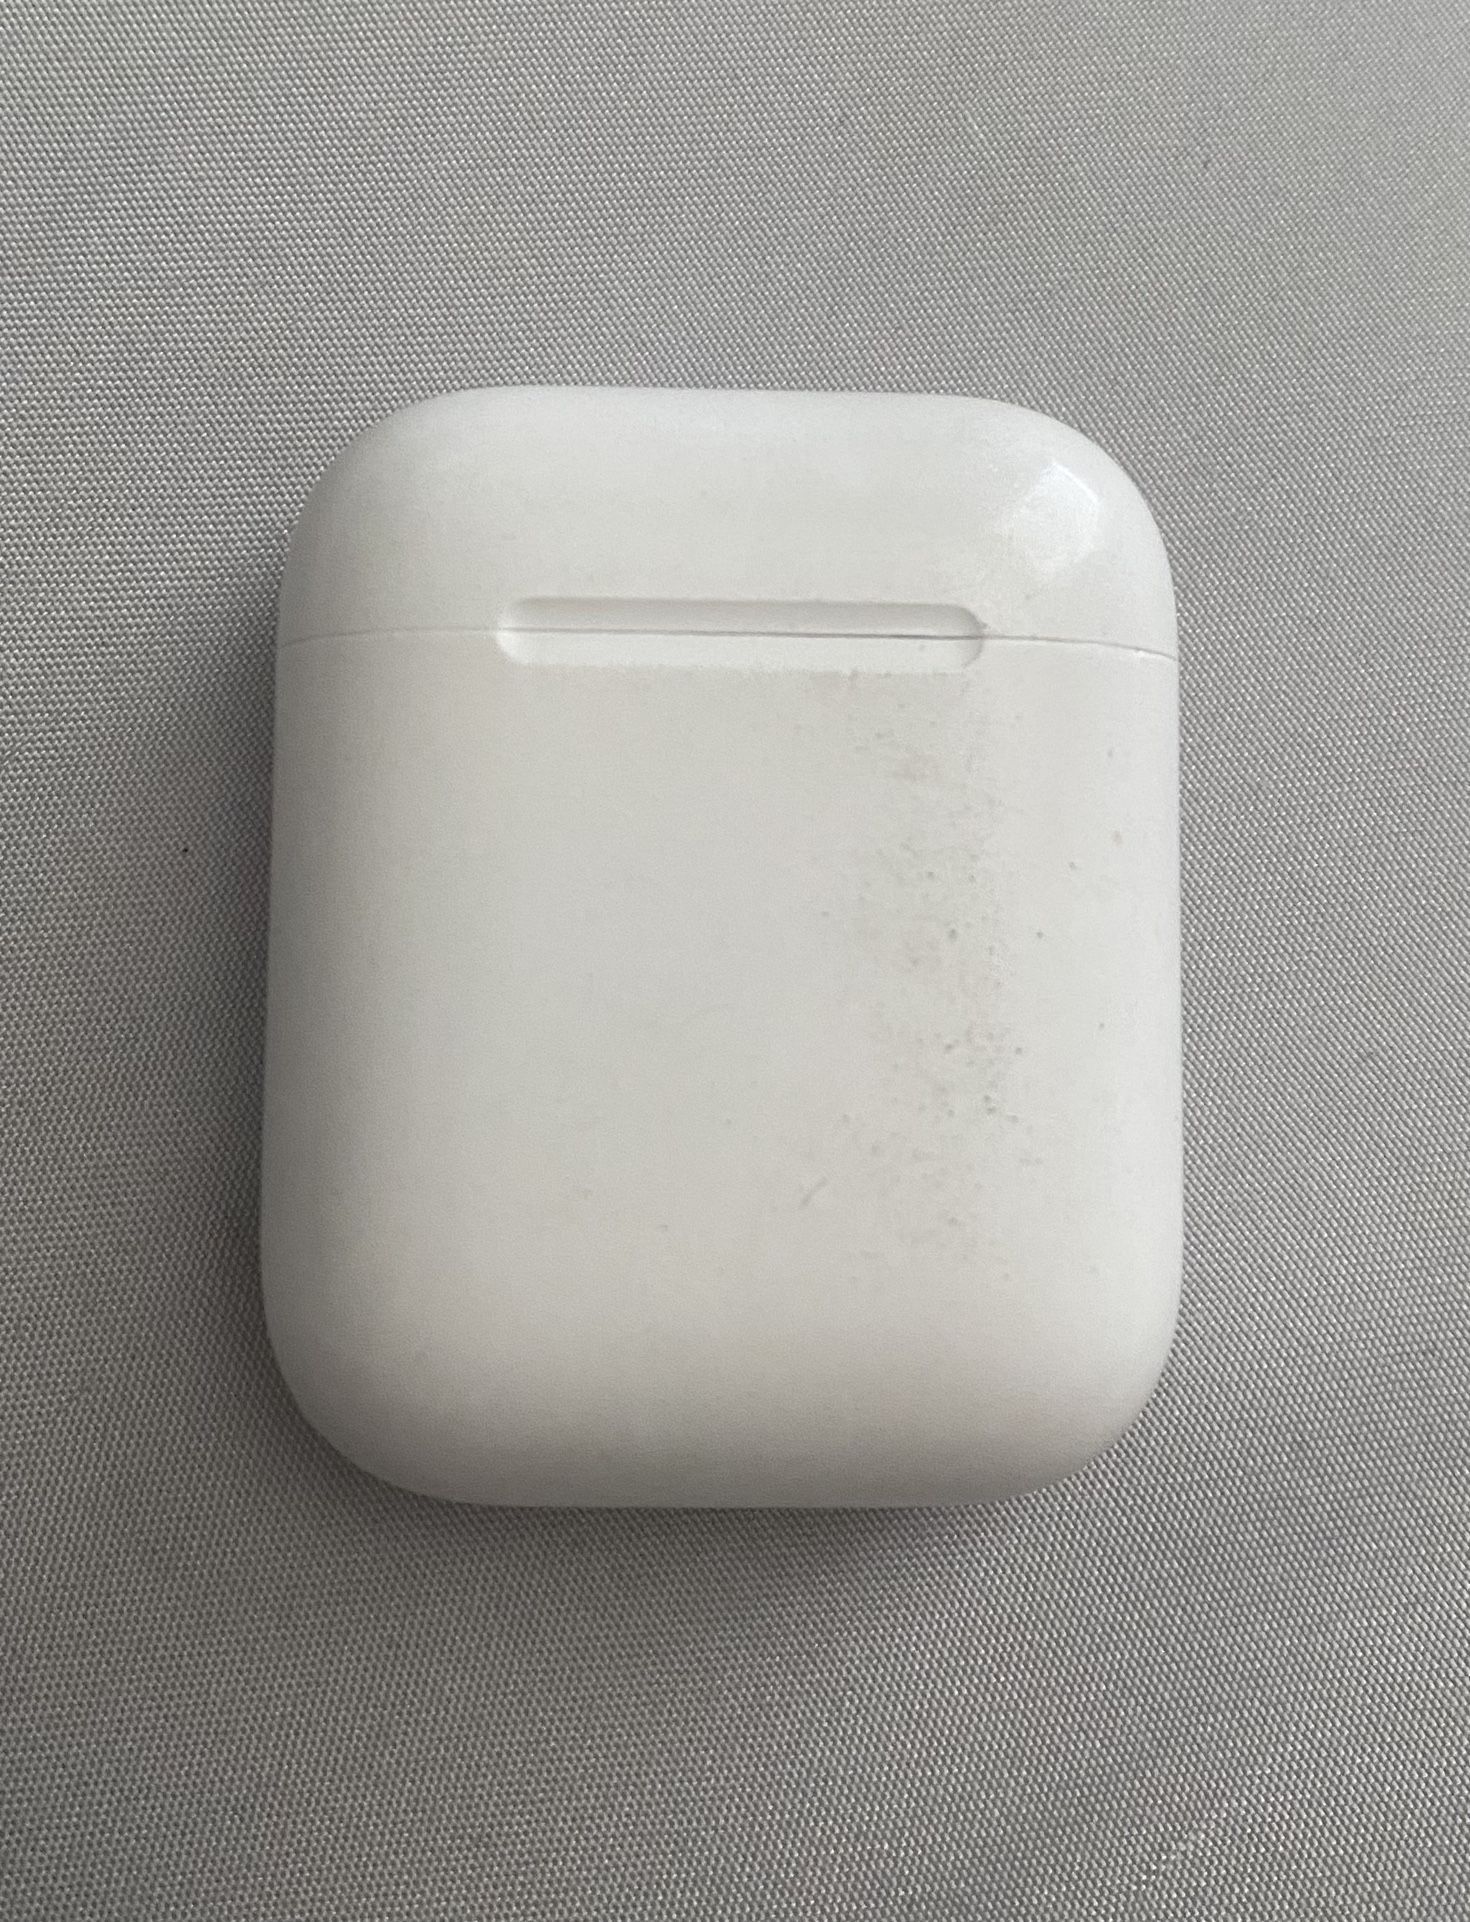 AirPods Apple I